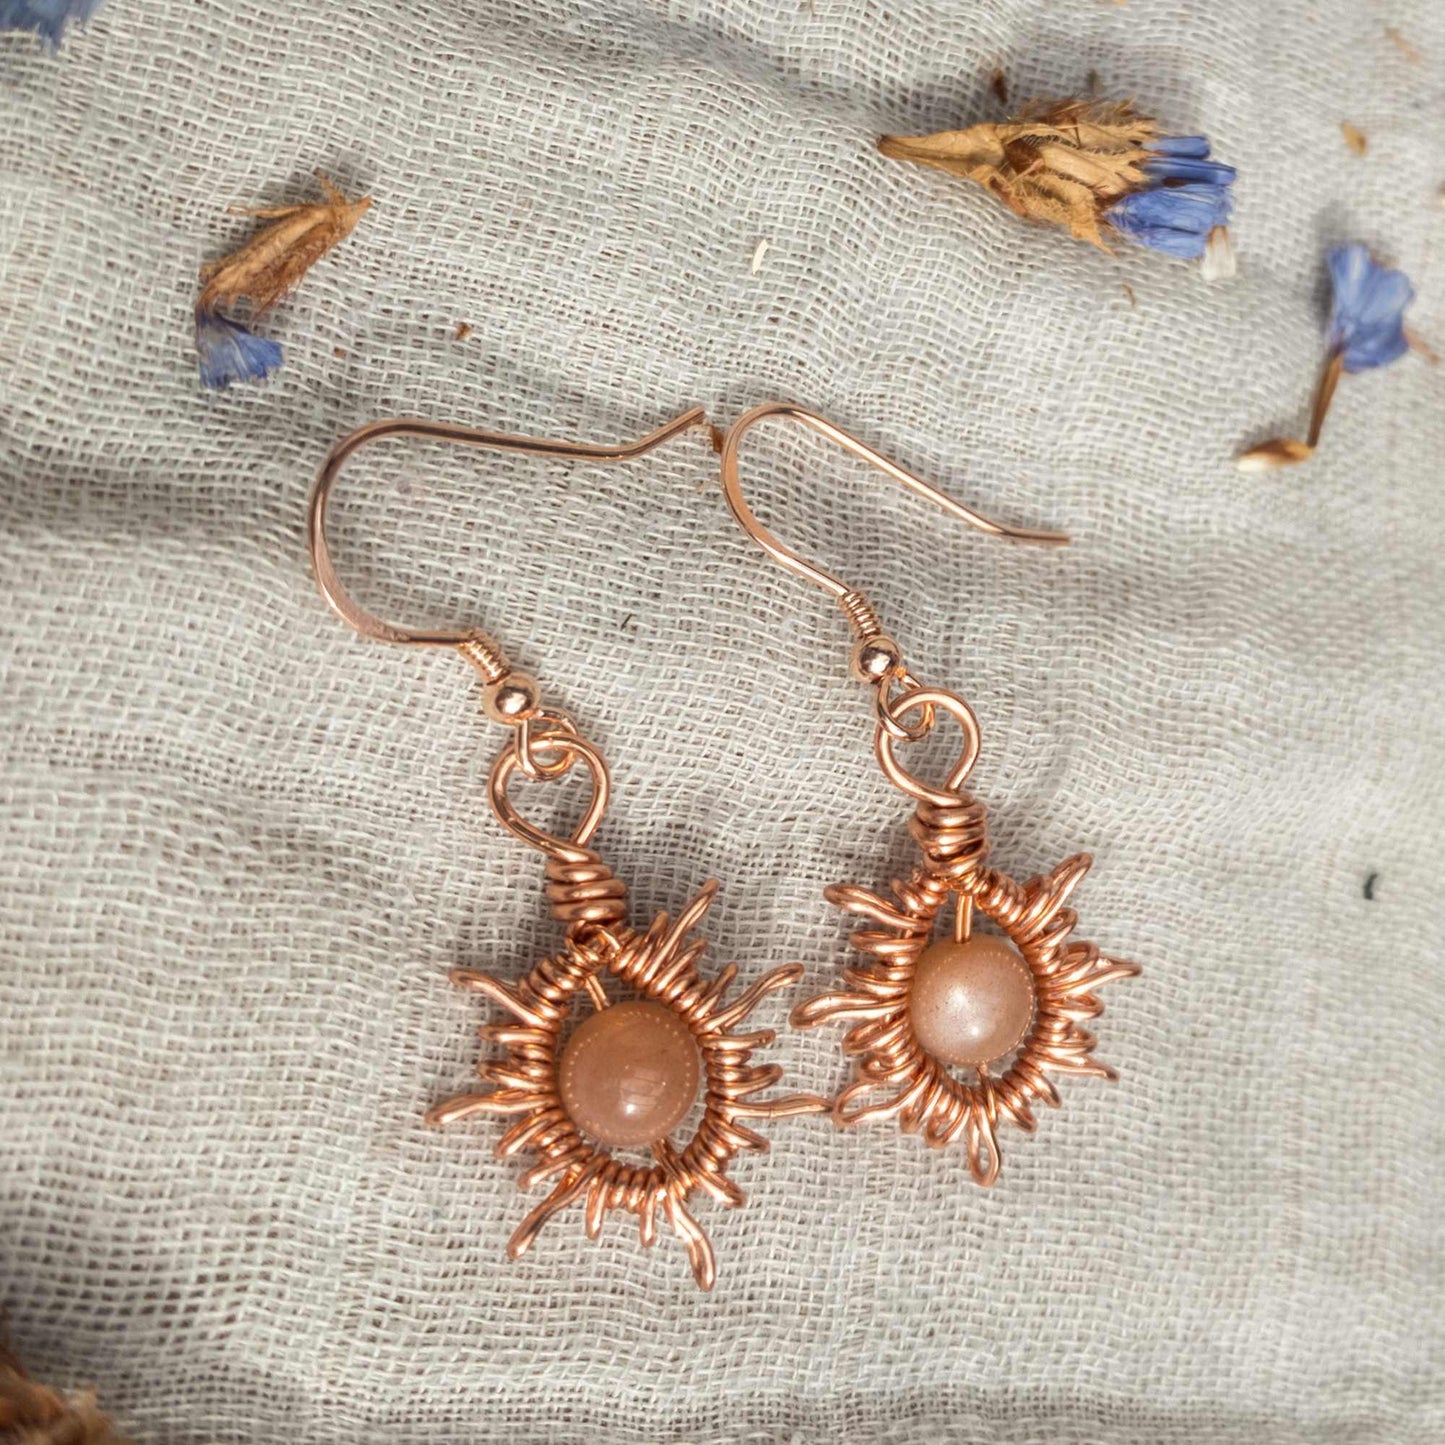 sunburst wire woven wrapped earrings with sunstone beads 